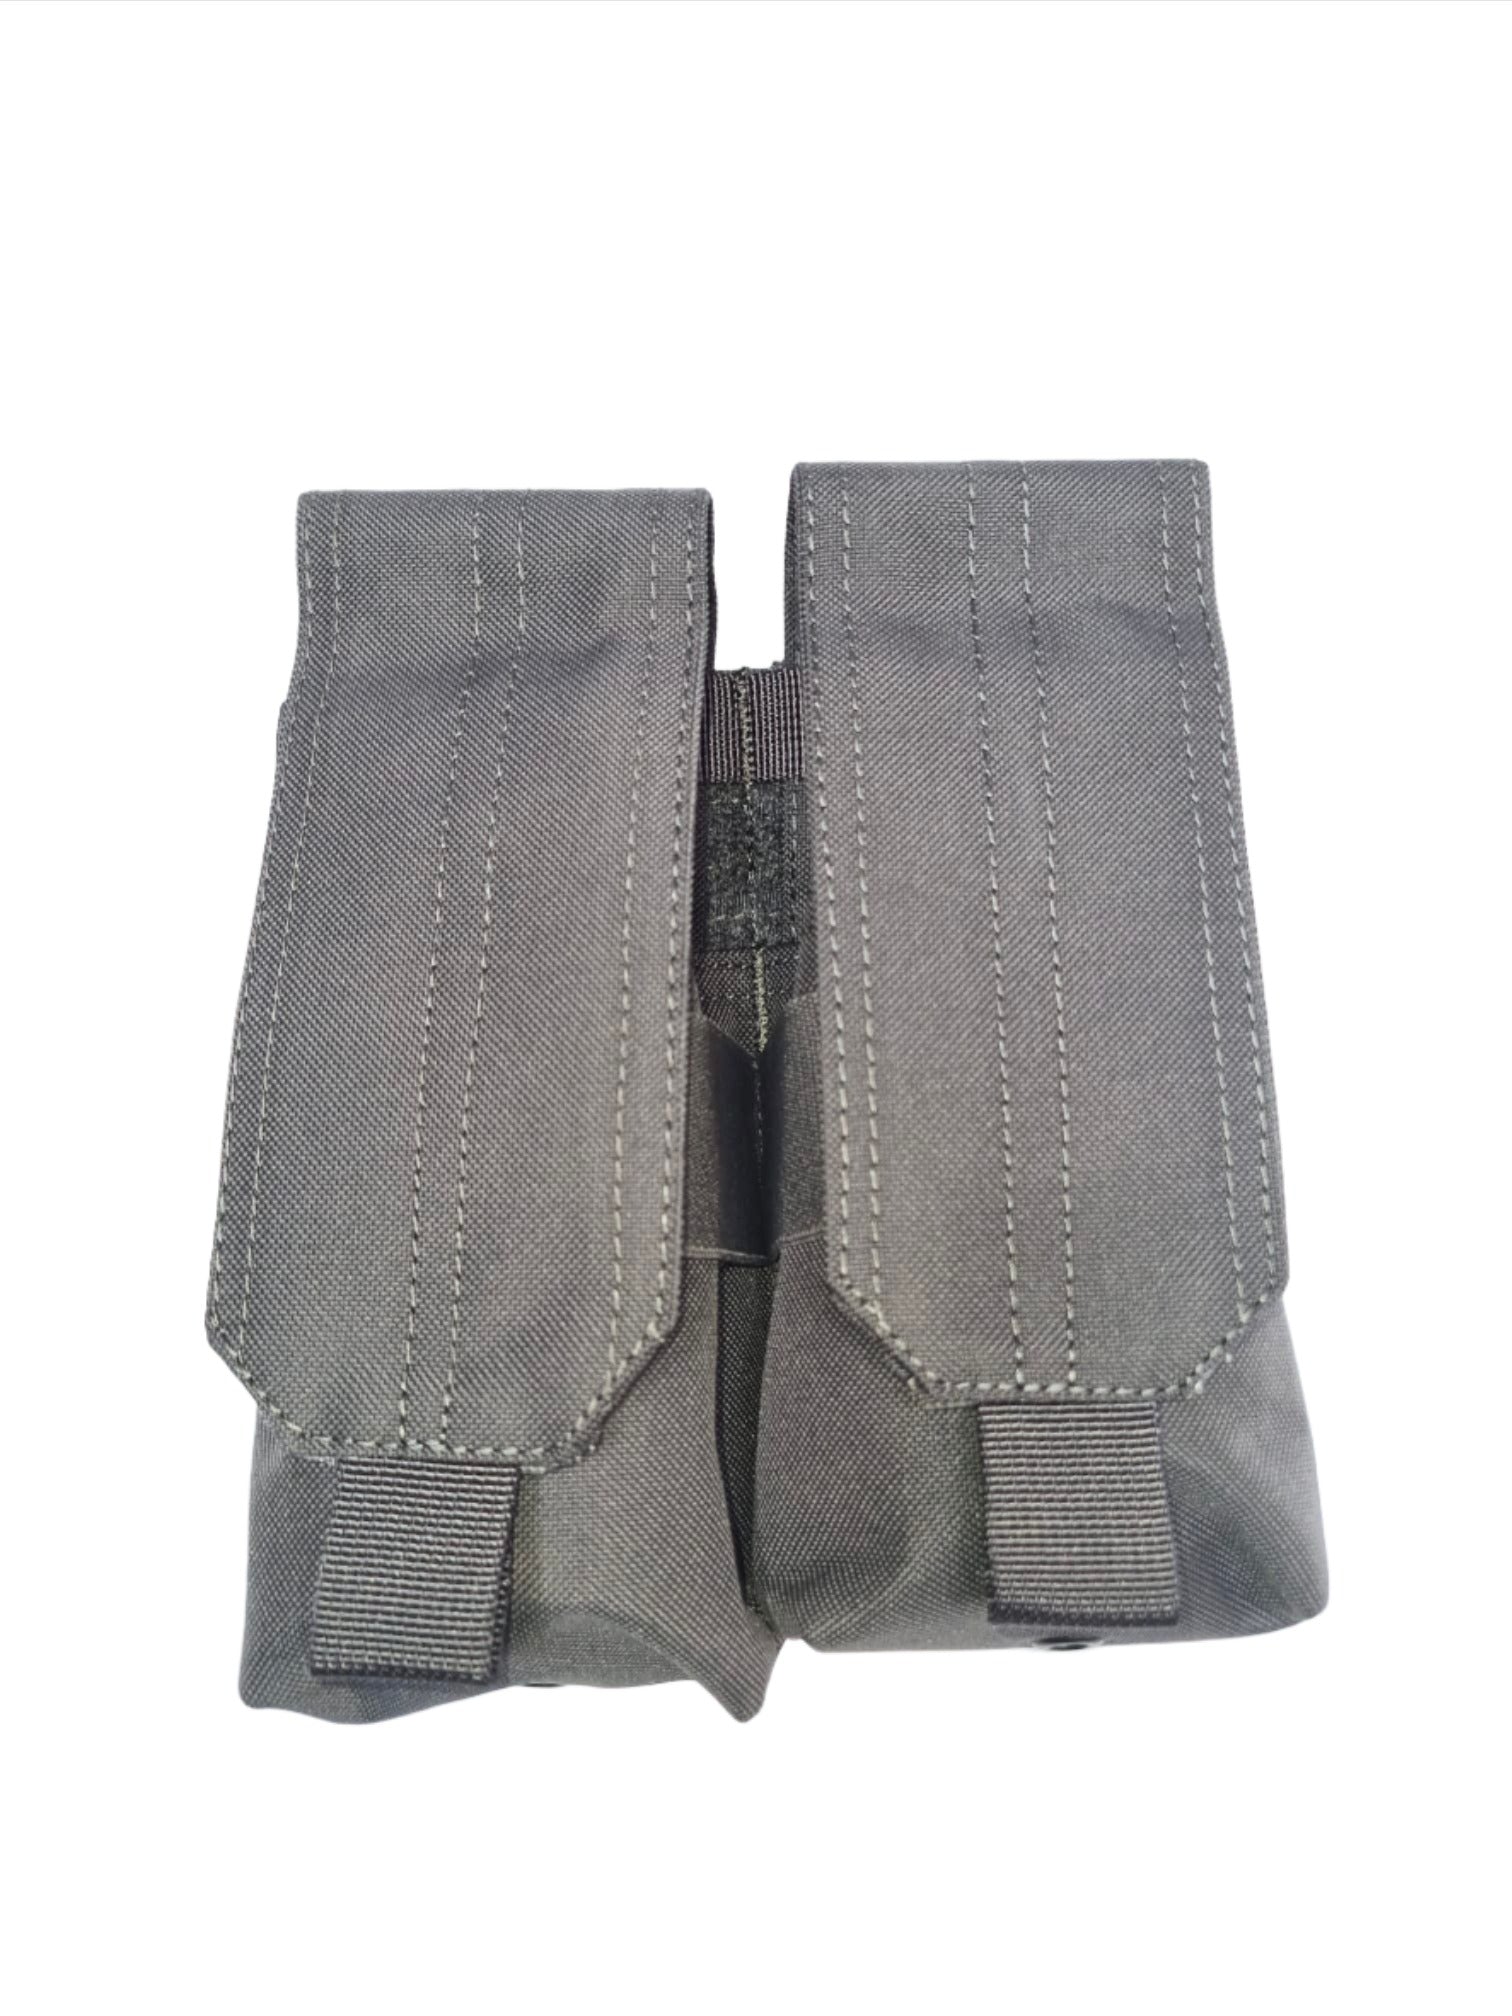 SHE-921 Double M4 5.56MM Mag Pouch GREY